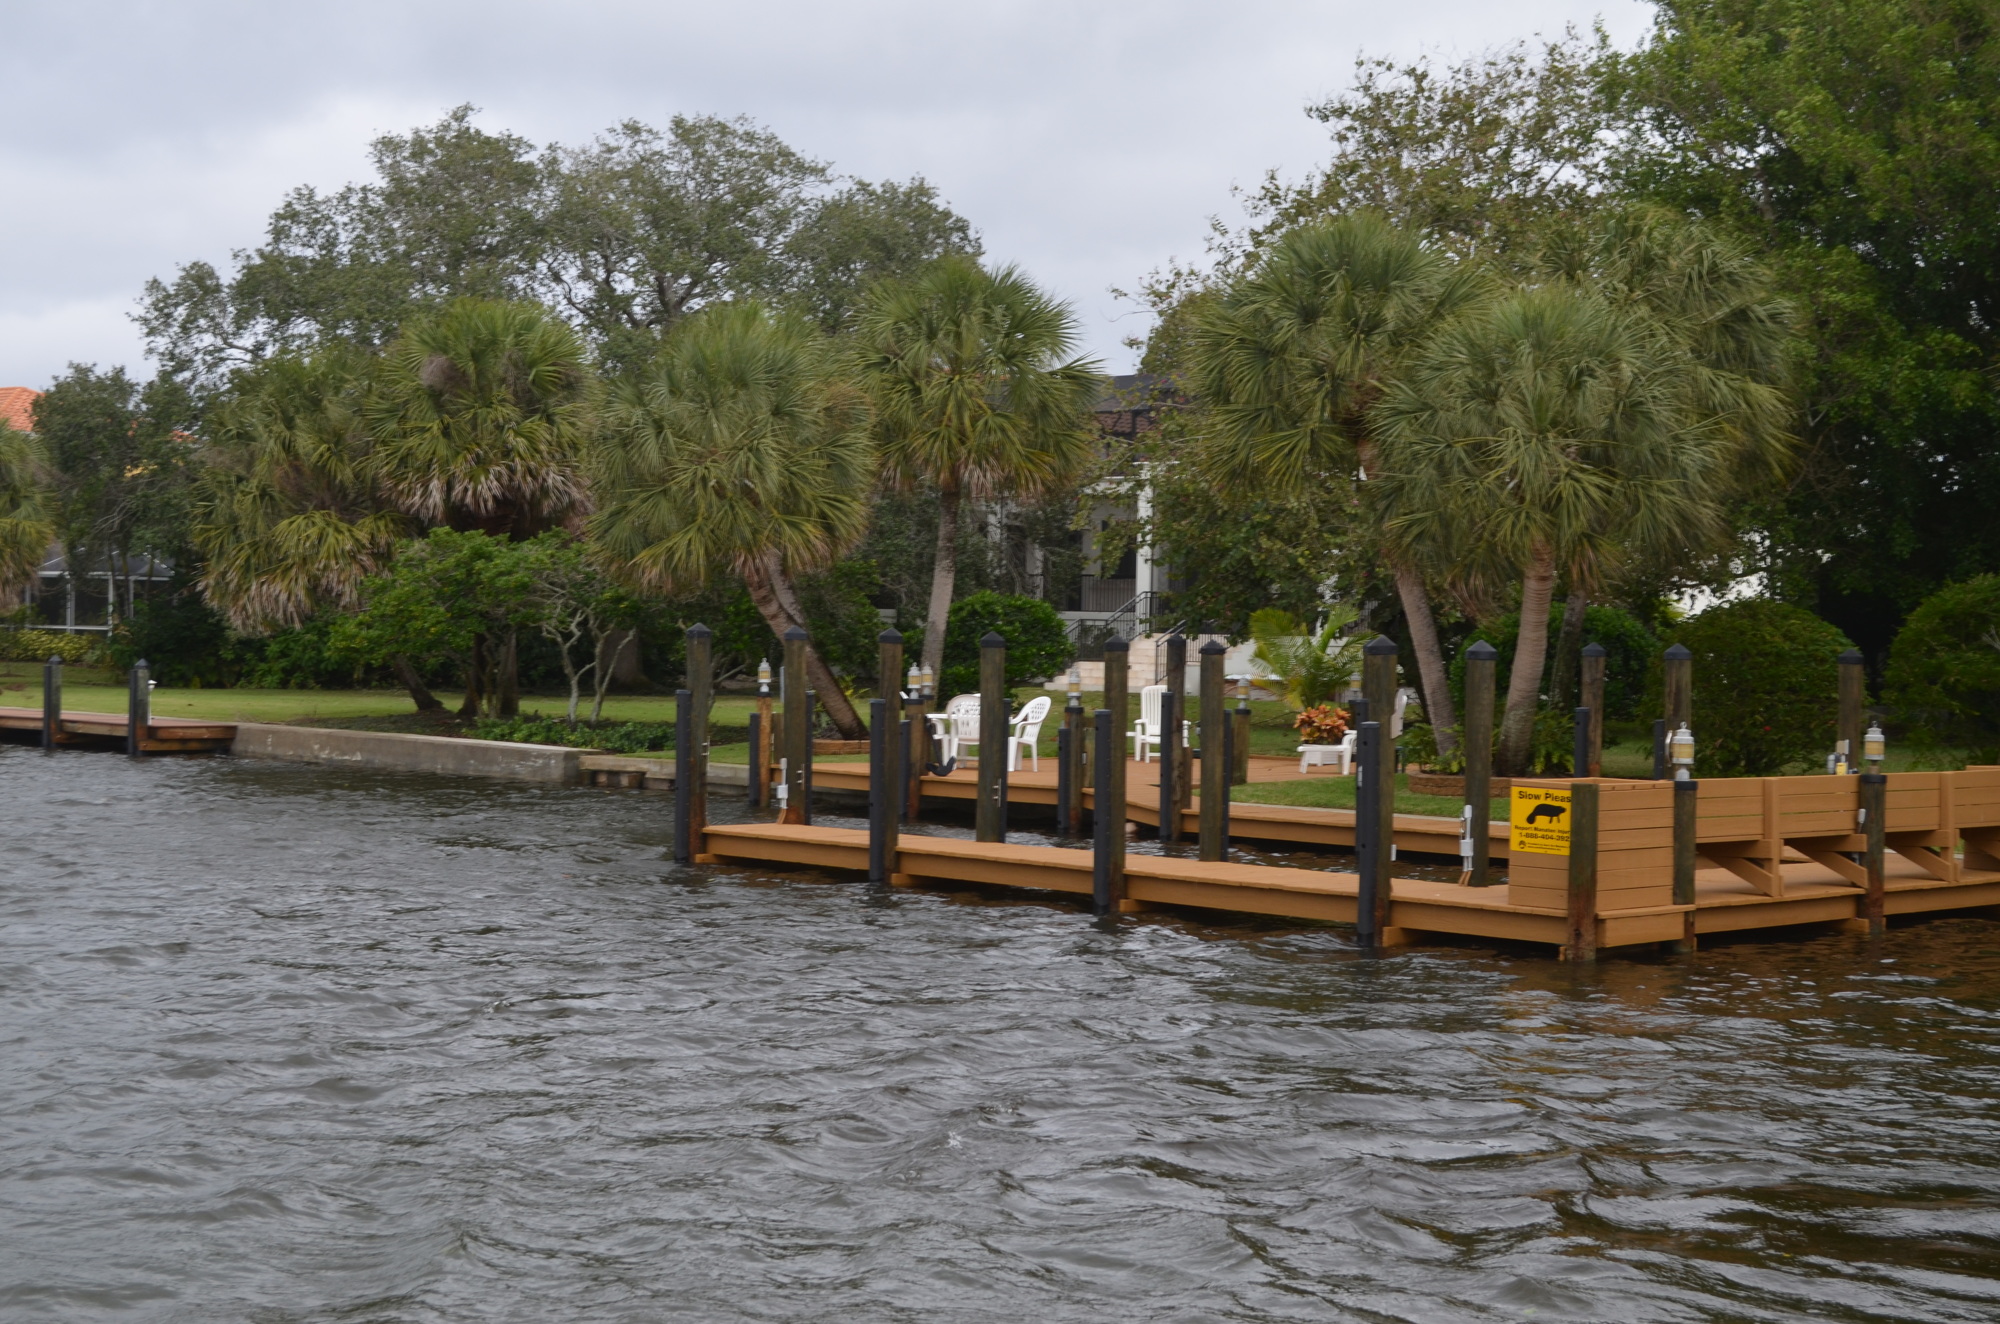 Tides from strong storms that came through Longboat Key early Sunday are high, including in Emerald Harbor canals.